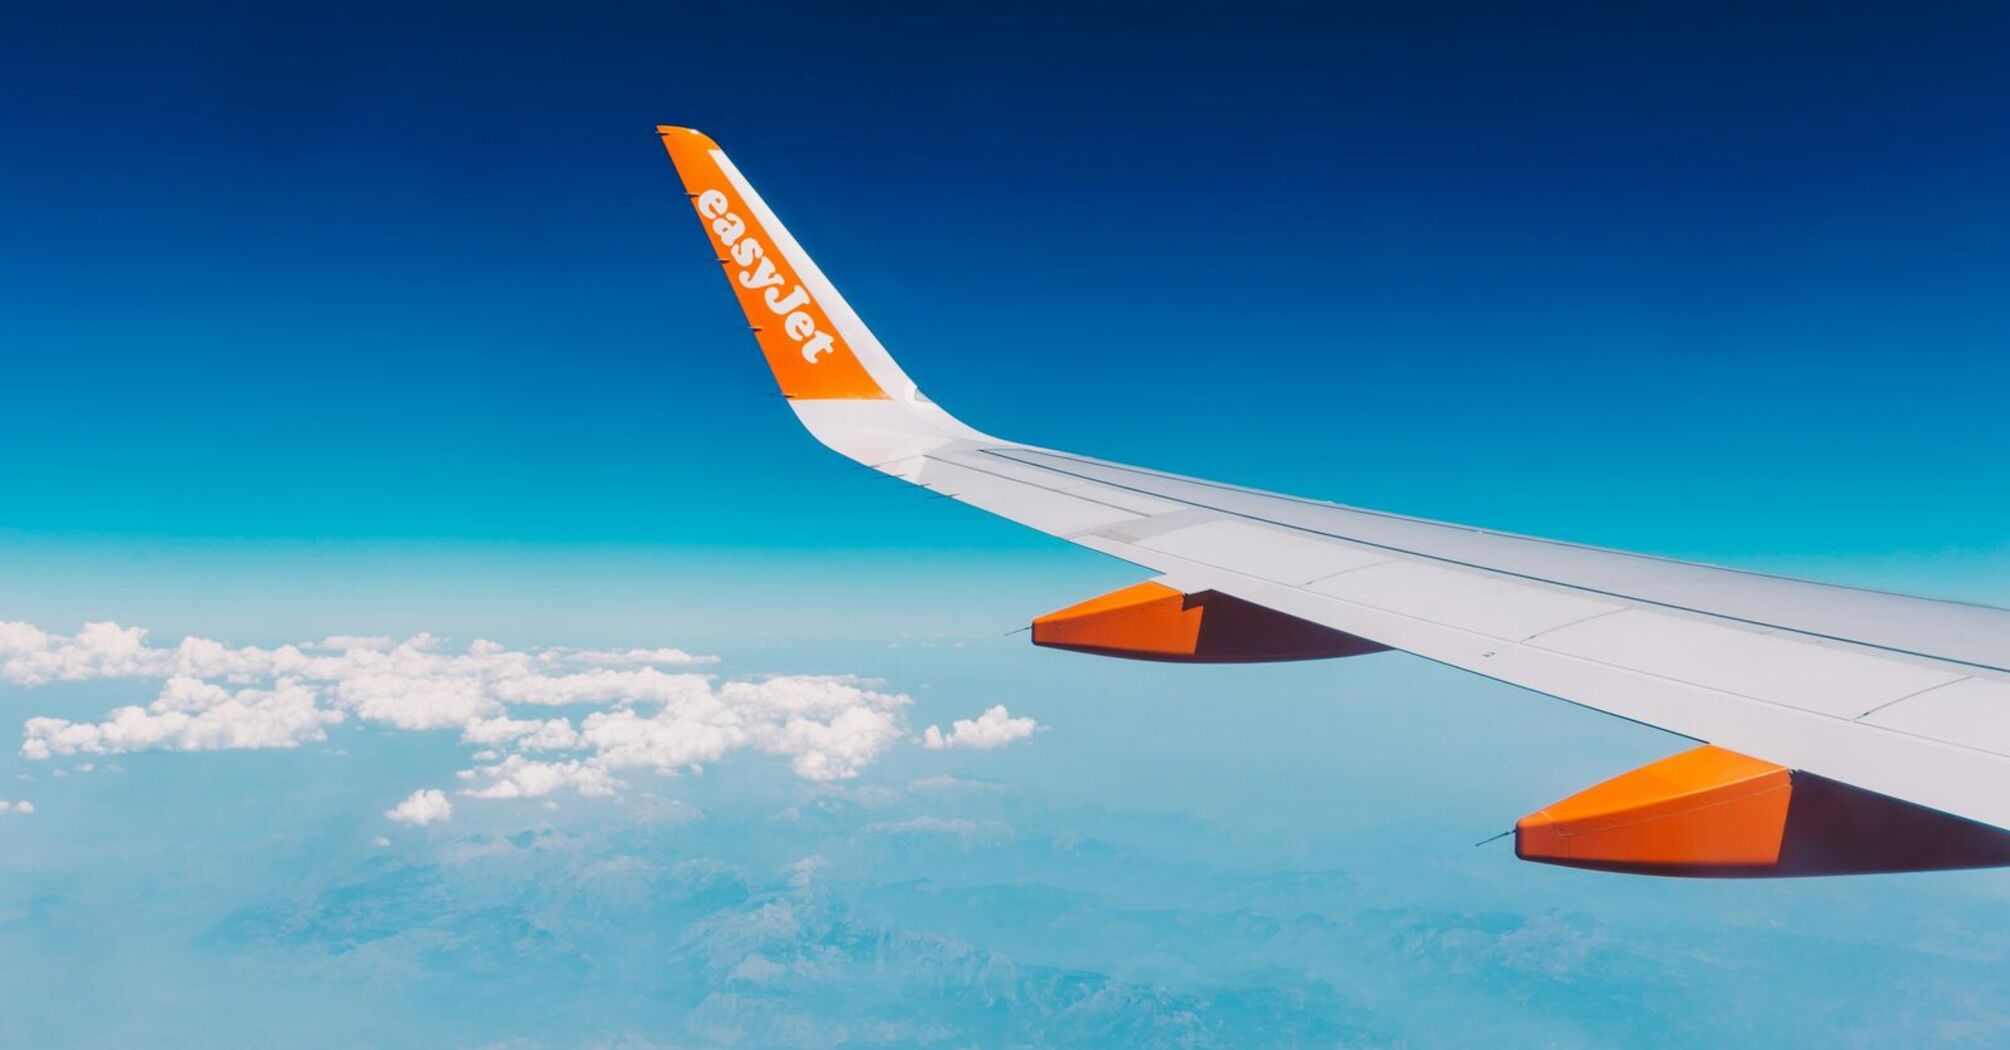 easyJet airplane wing in flight over landscape